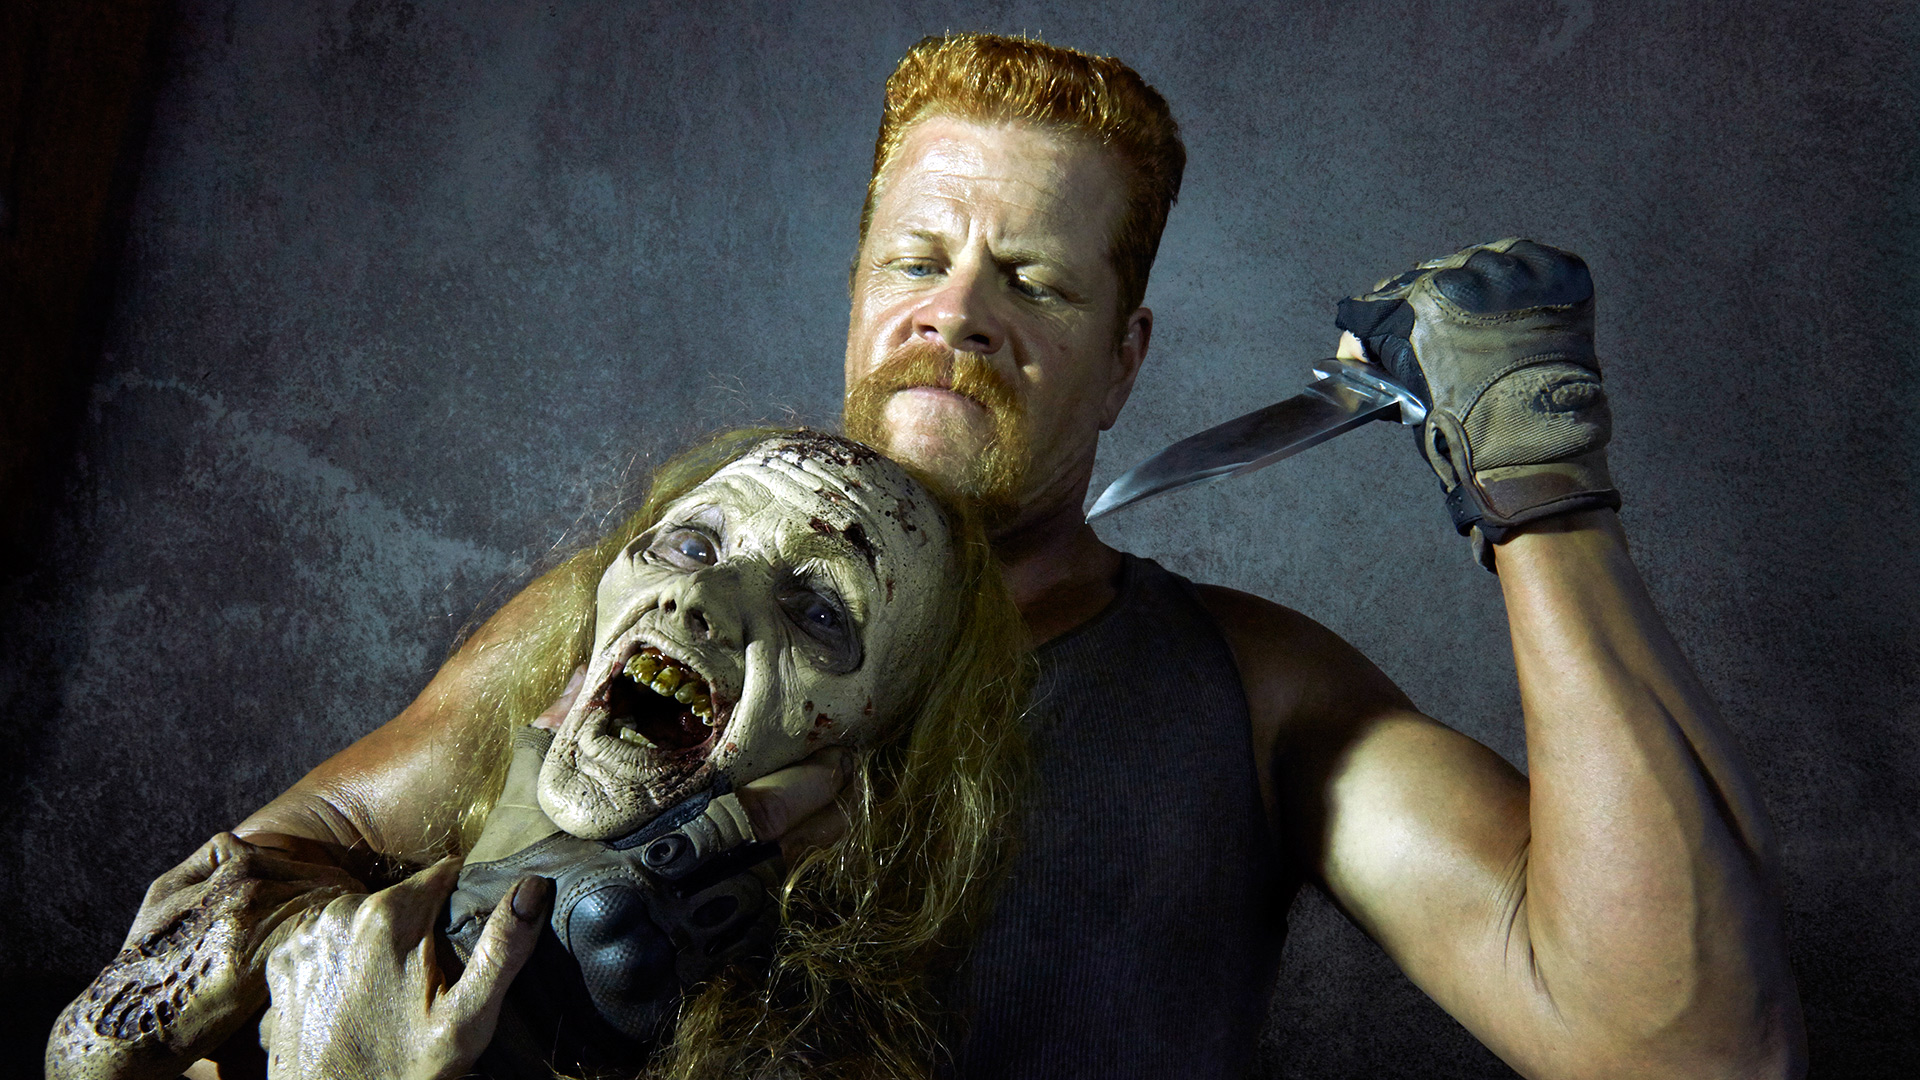 tv show, the walking dead, abraham ford, michael cudlitz, zombie